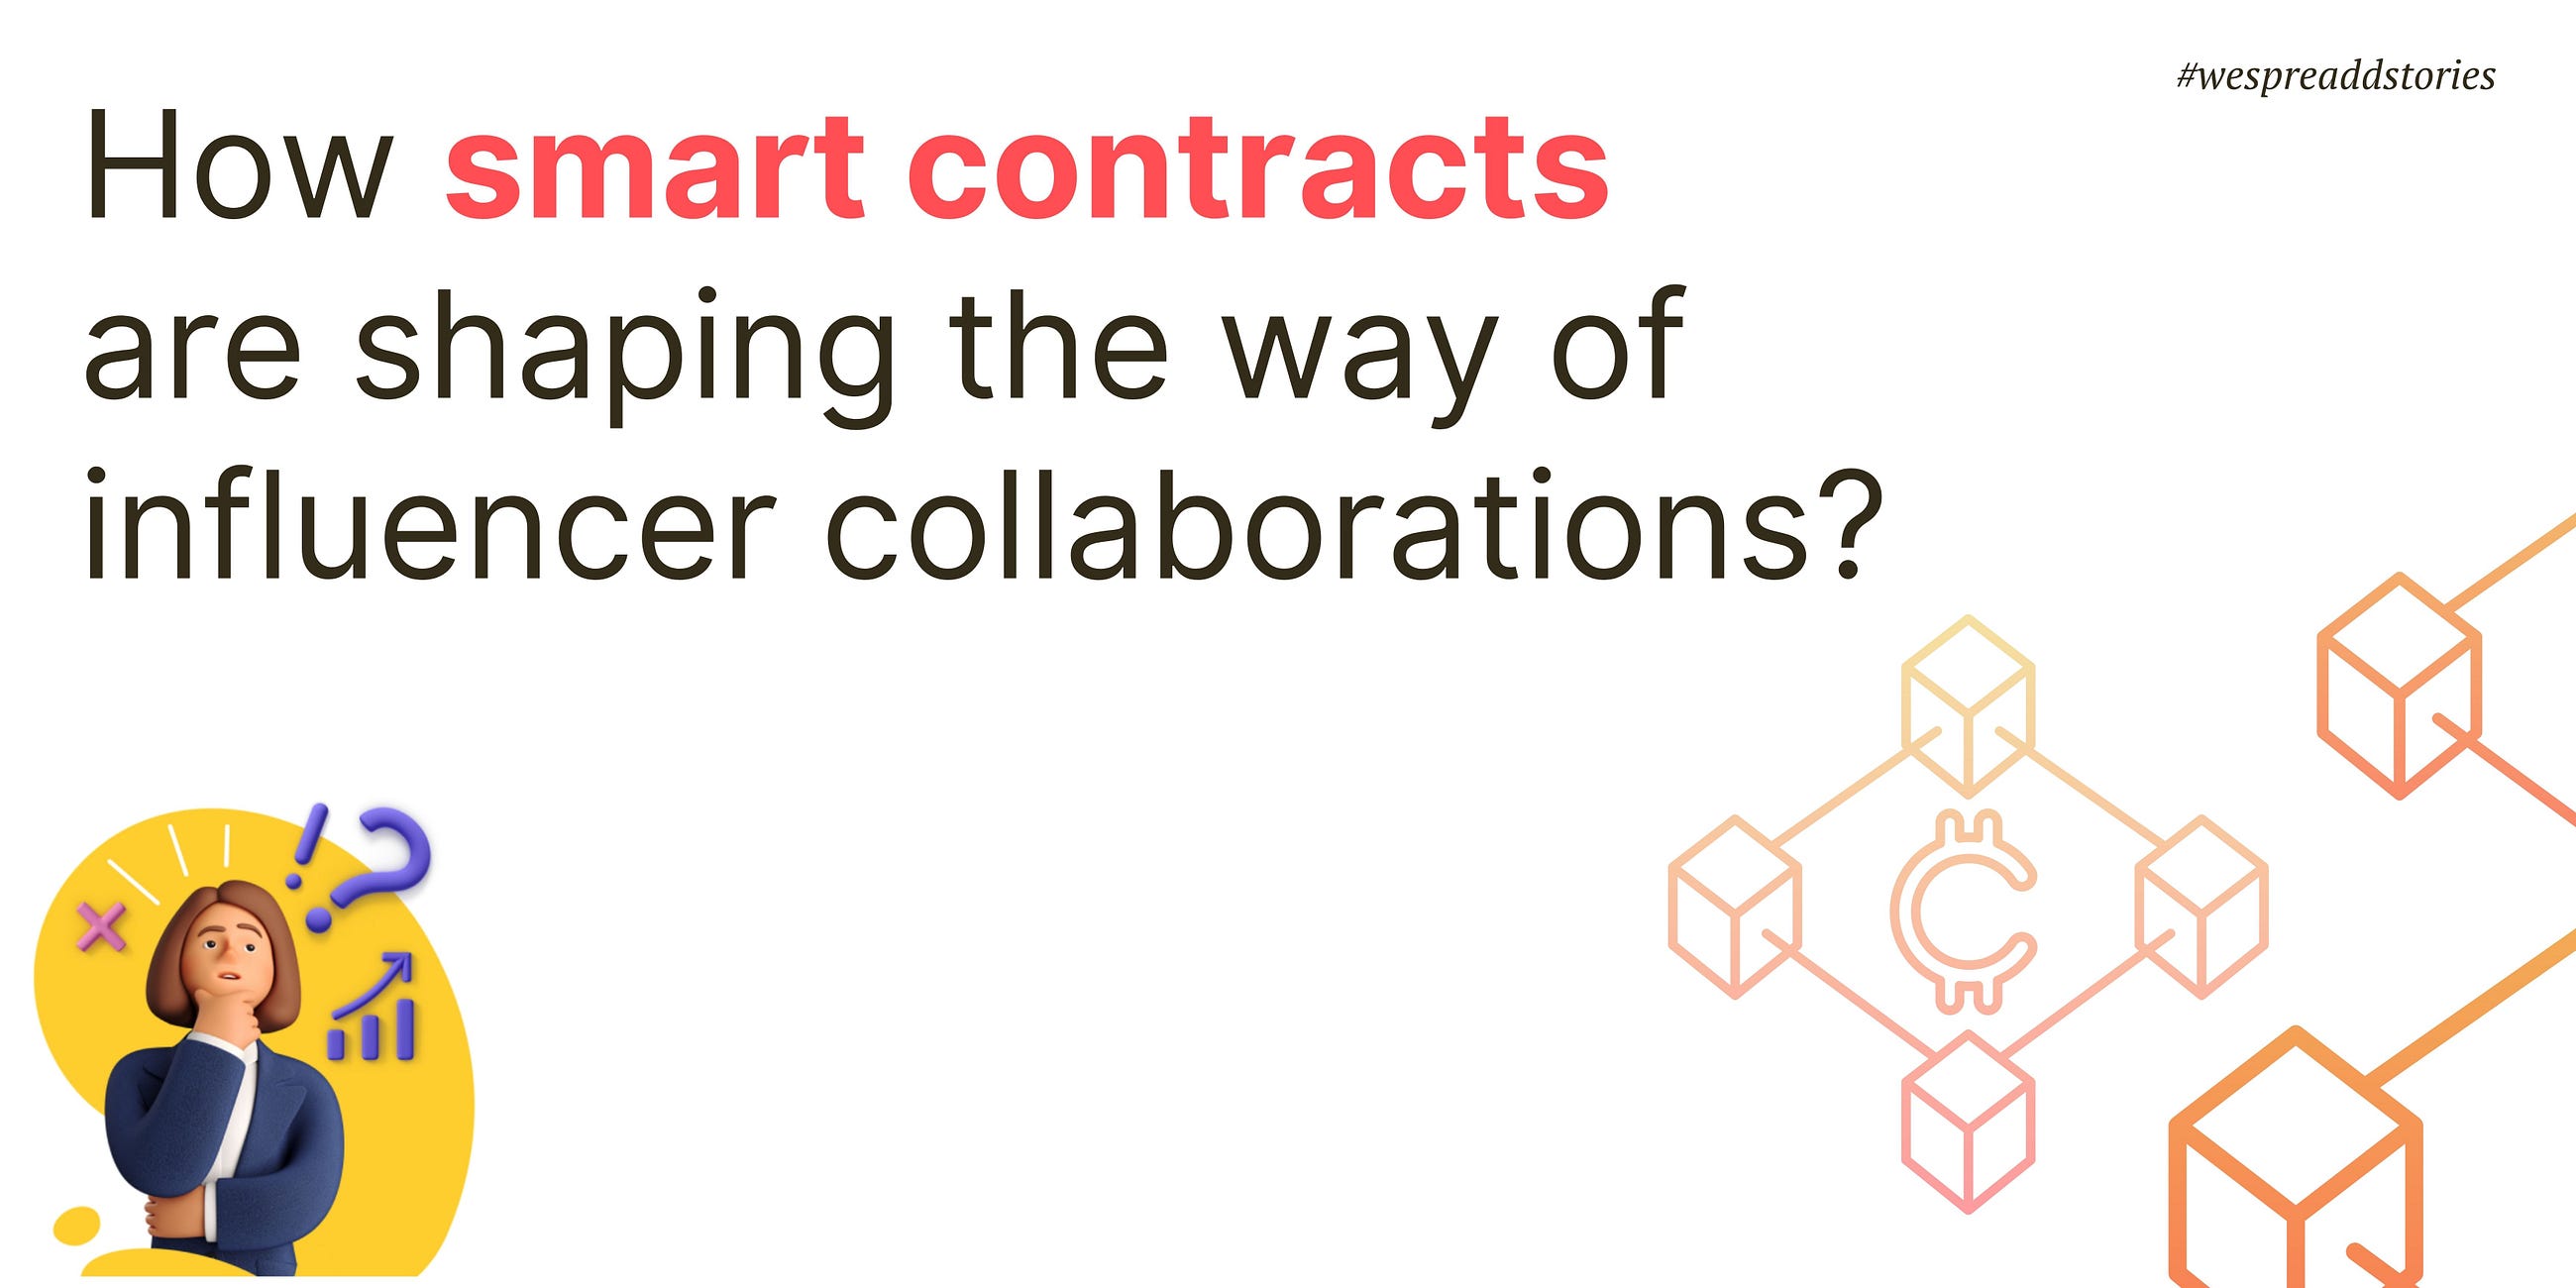 How smart contracts are shaping the way of influencer collaborations?